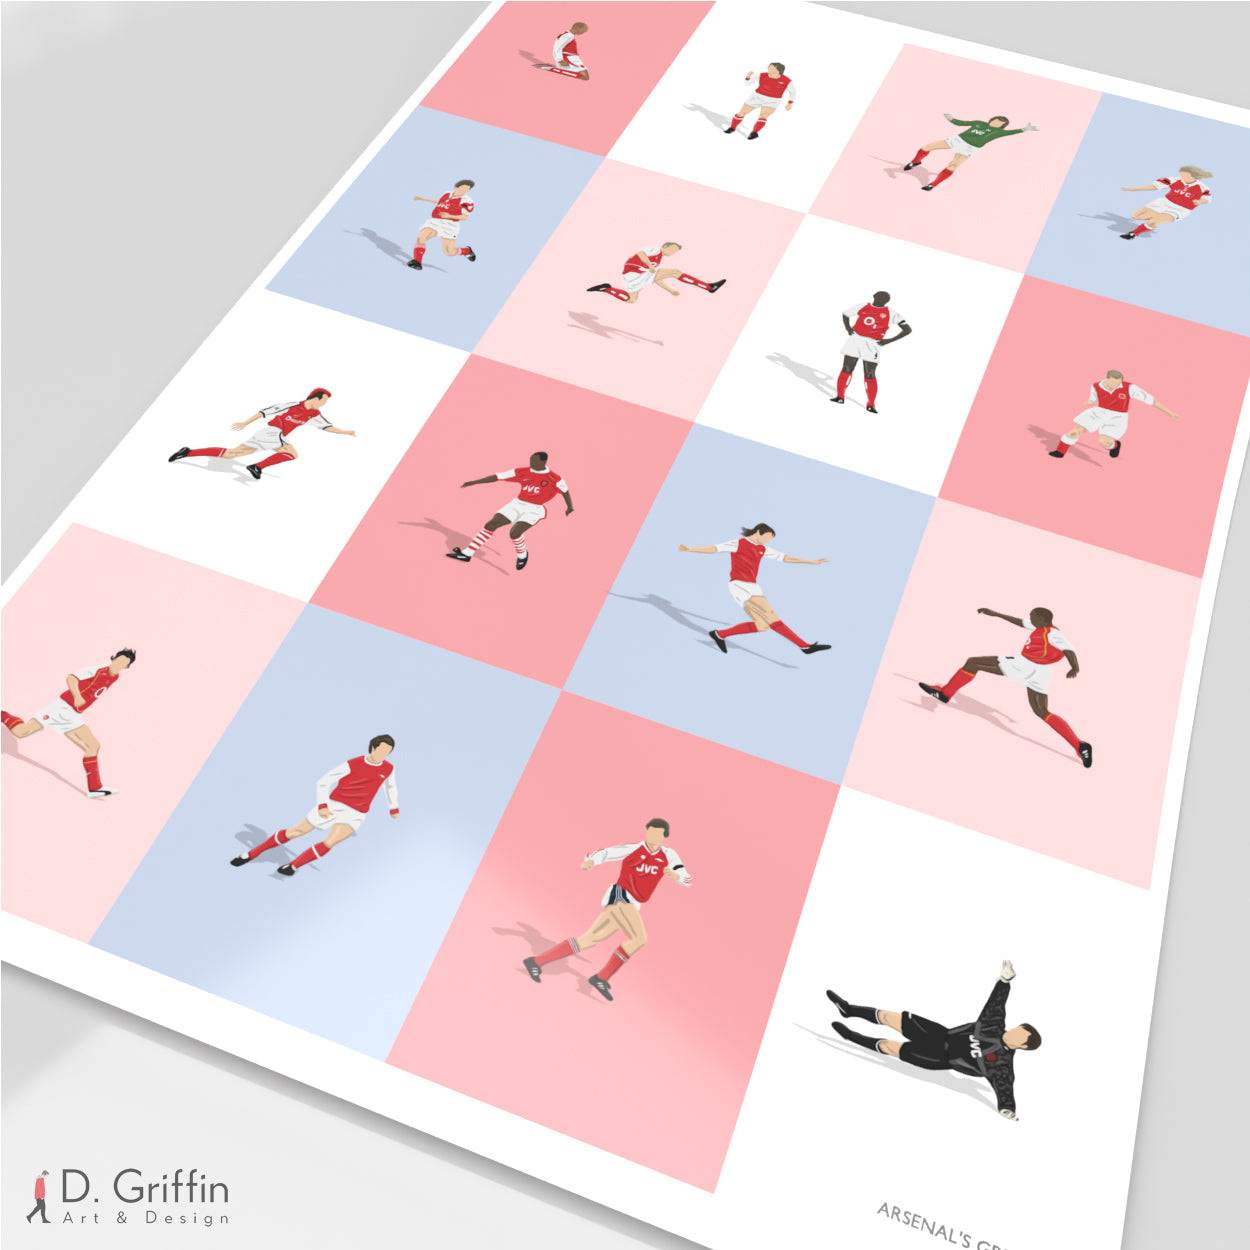 Arsenal’s Greatest Players Print